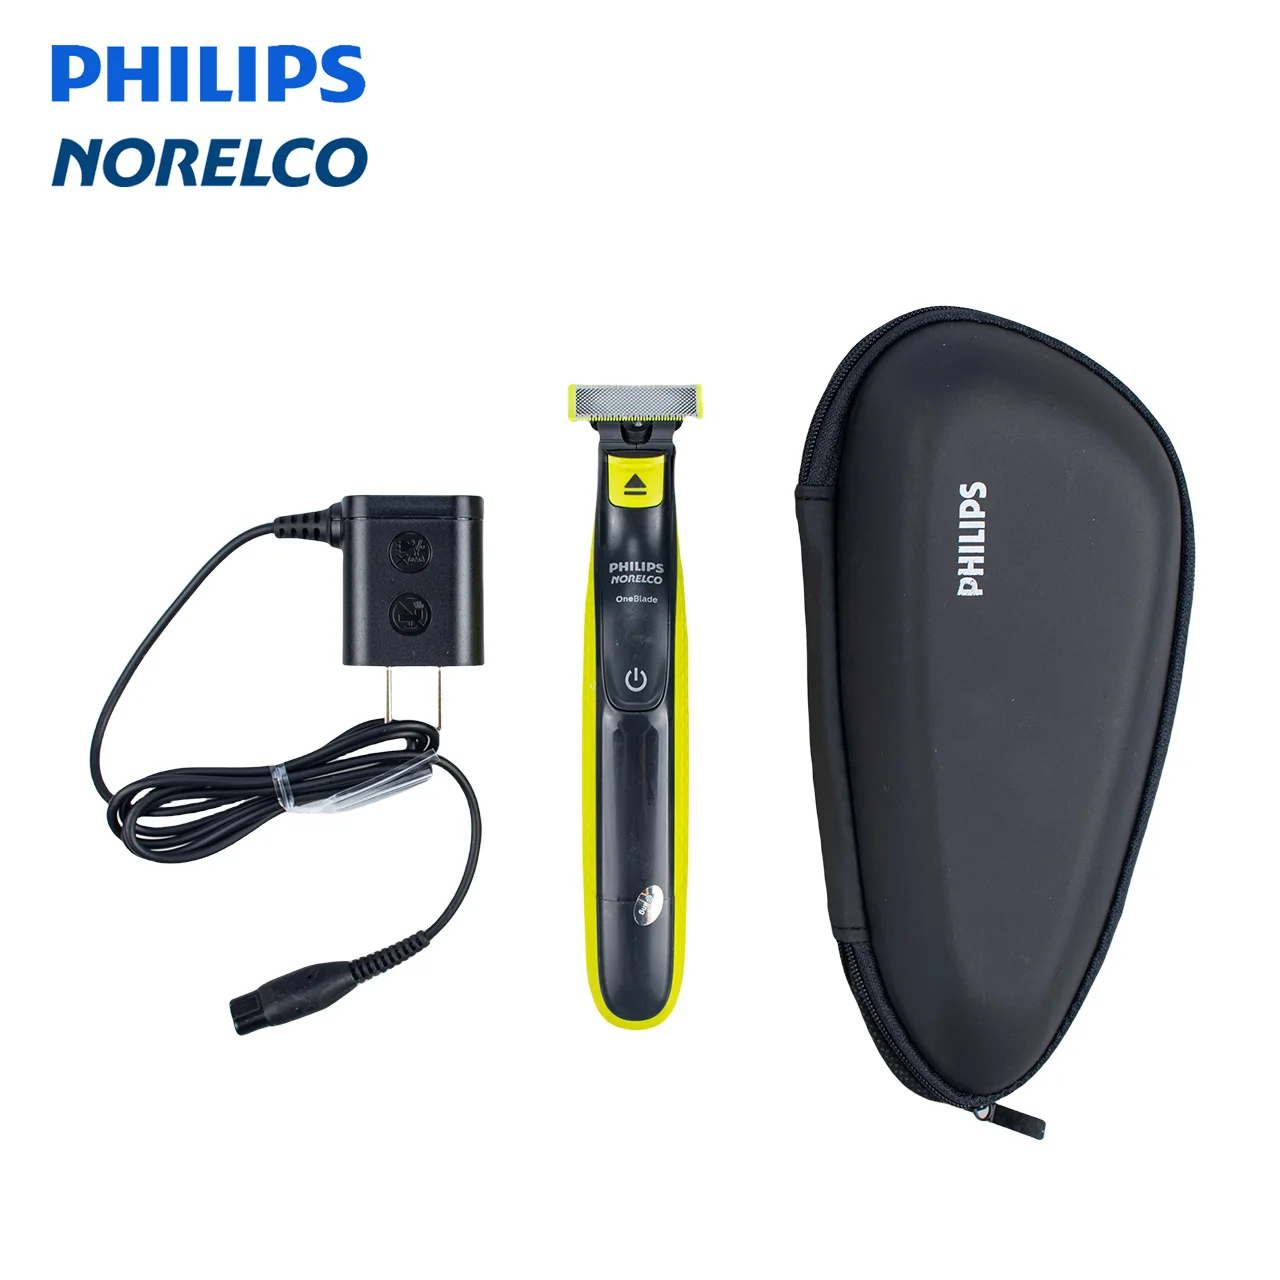 Philips Norelco OneBlade Rechargeable Hybrid Electric Trimmer and Shaver QP2520/70 no Original Packing